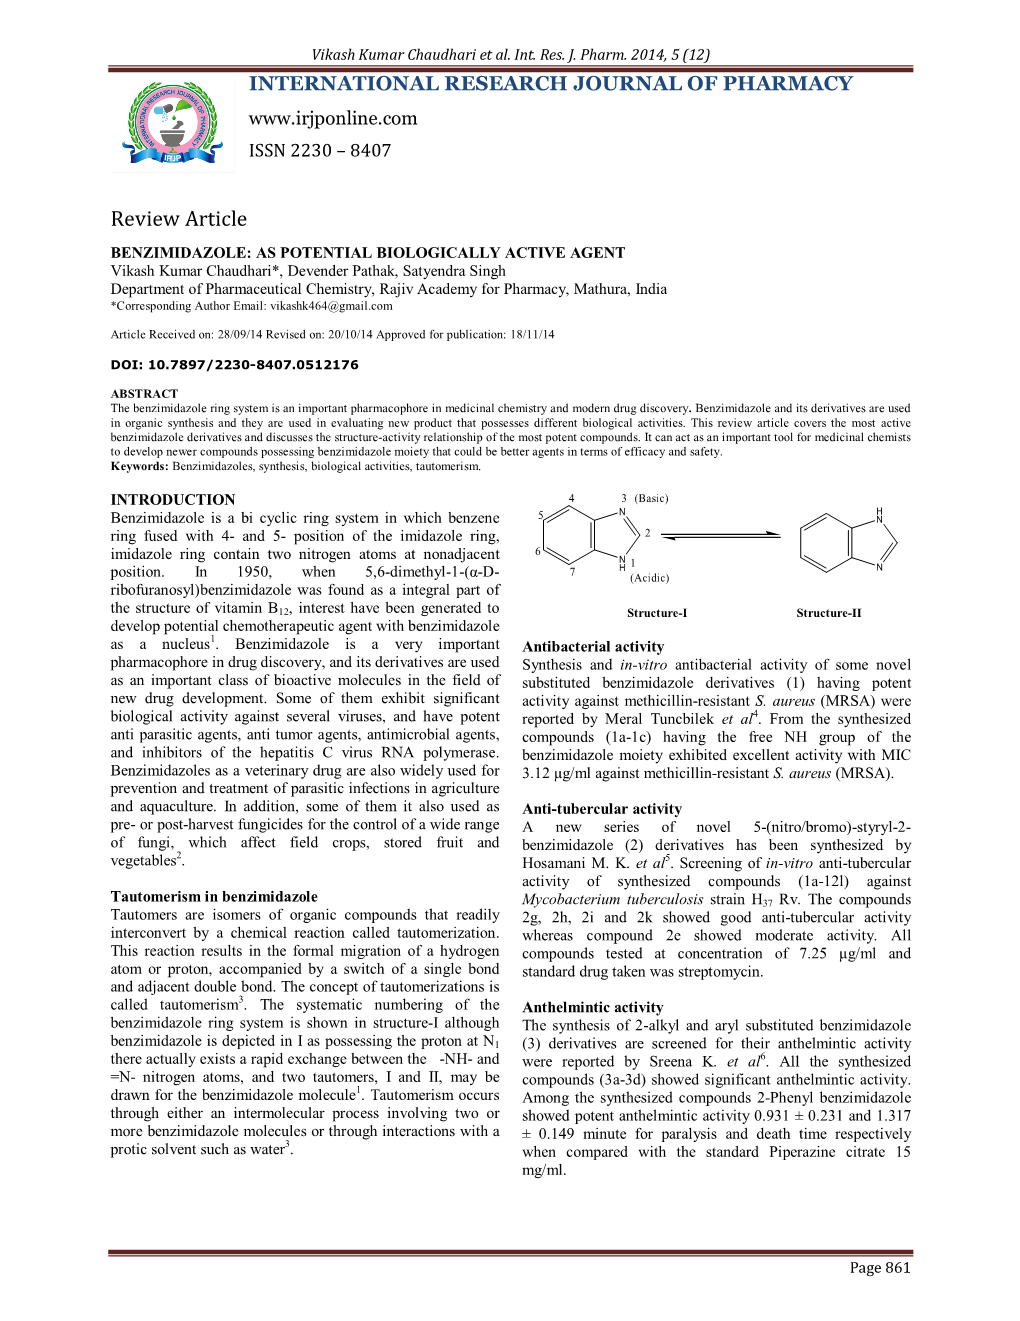 Benzimidazole: As Potential Biologically Active